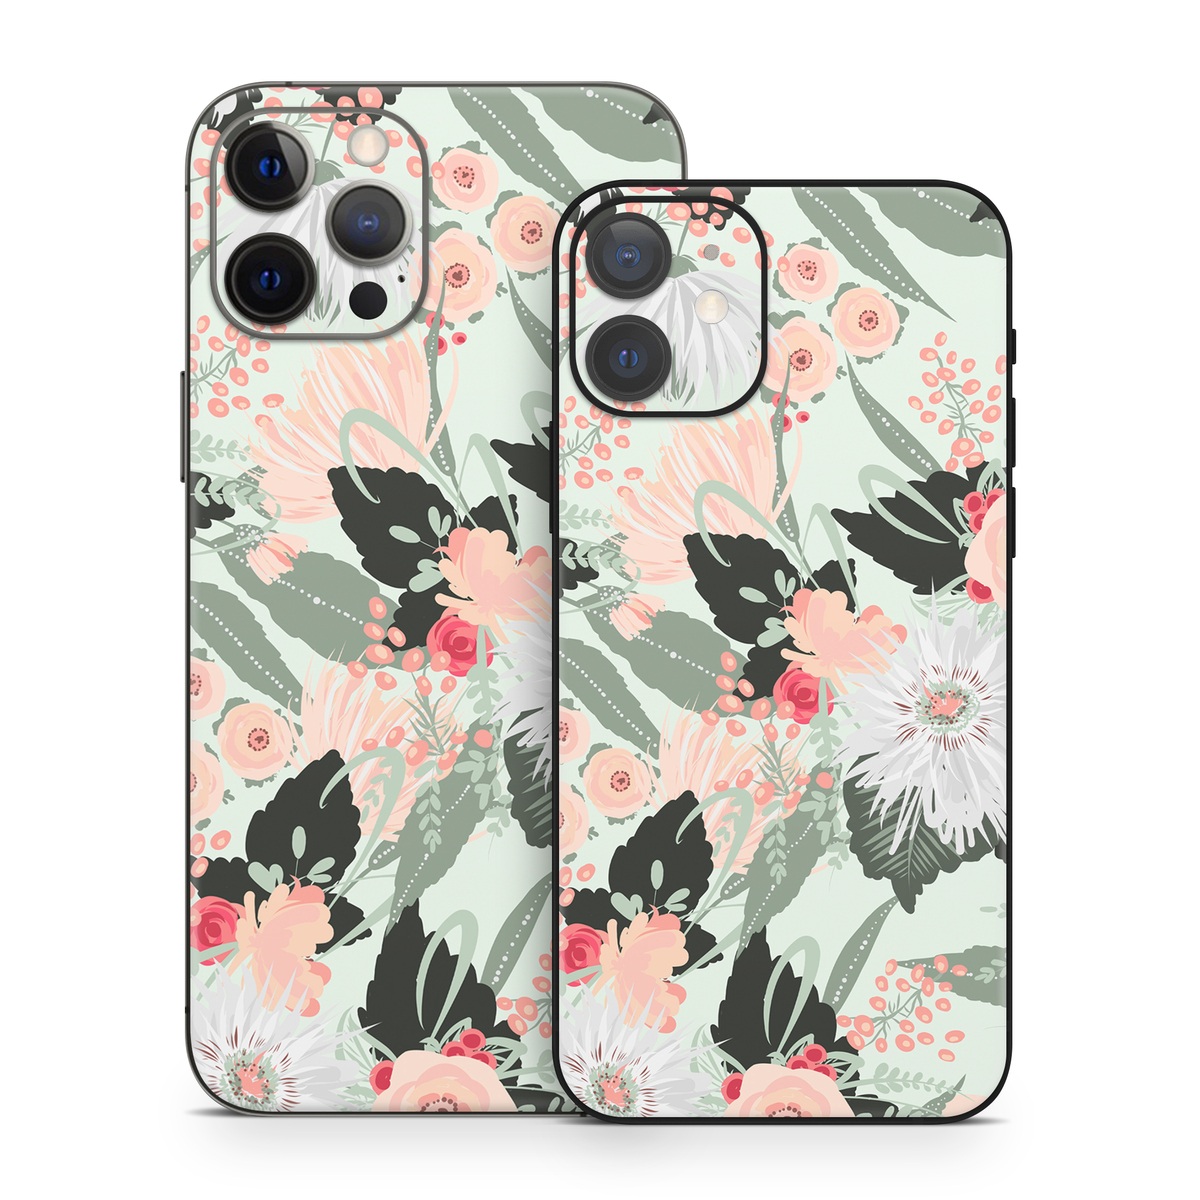 iPhone 12 Series Skin design of Pattern, Pink, Floral design, Design, Textile, Wrapping paper, Plant, Peach, Flower, with green, red, white, pink colors